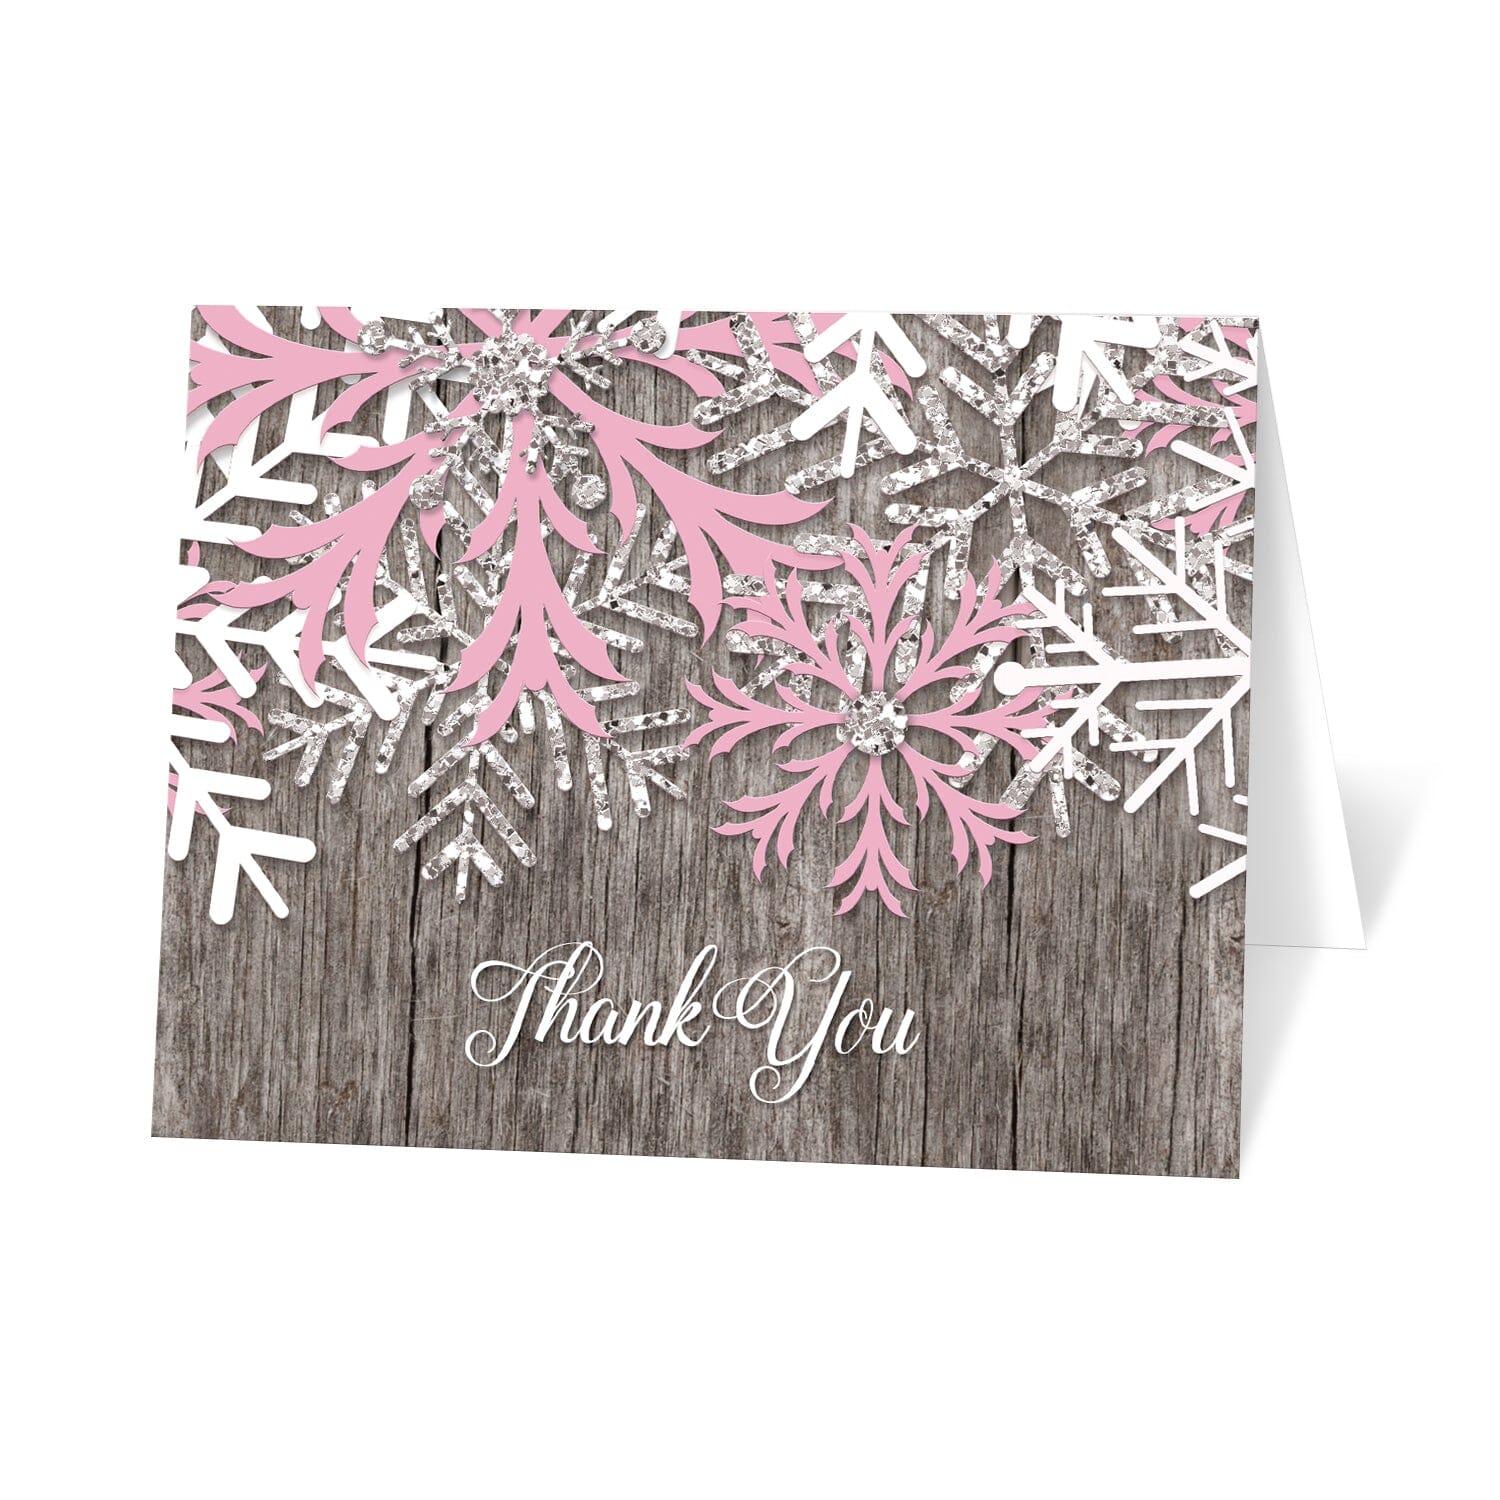 pink rustic wood background